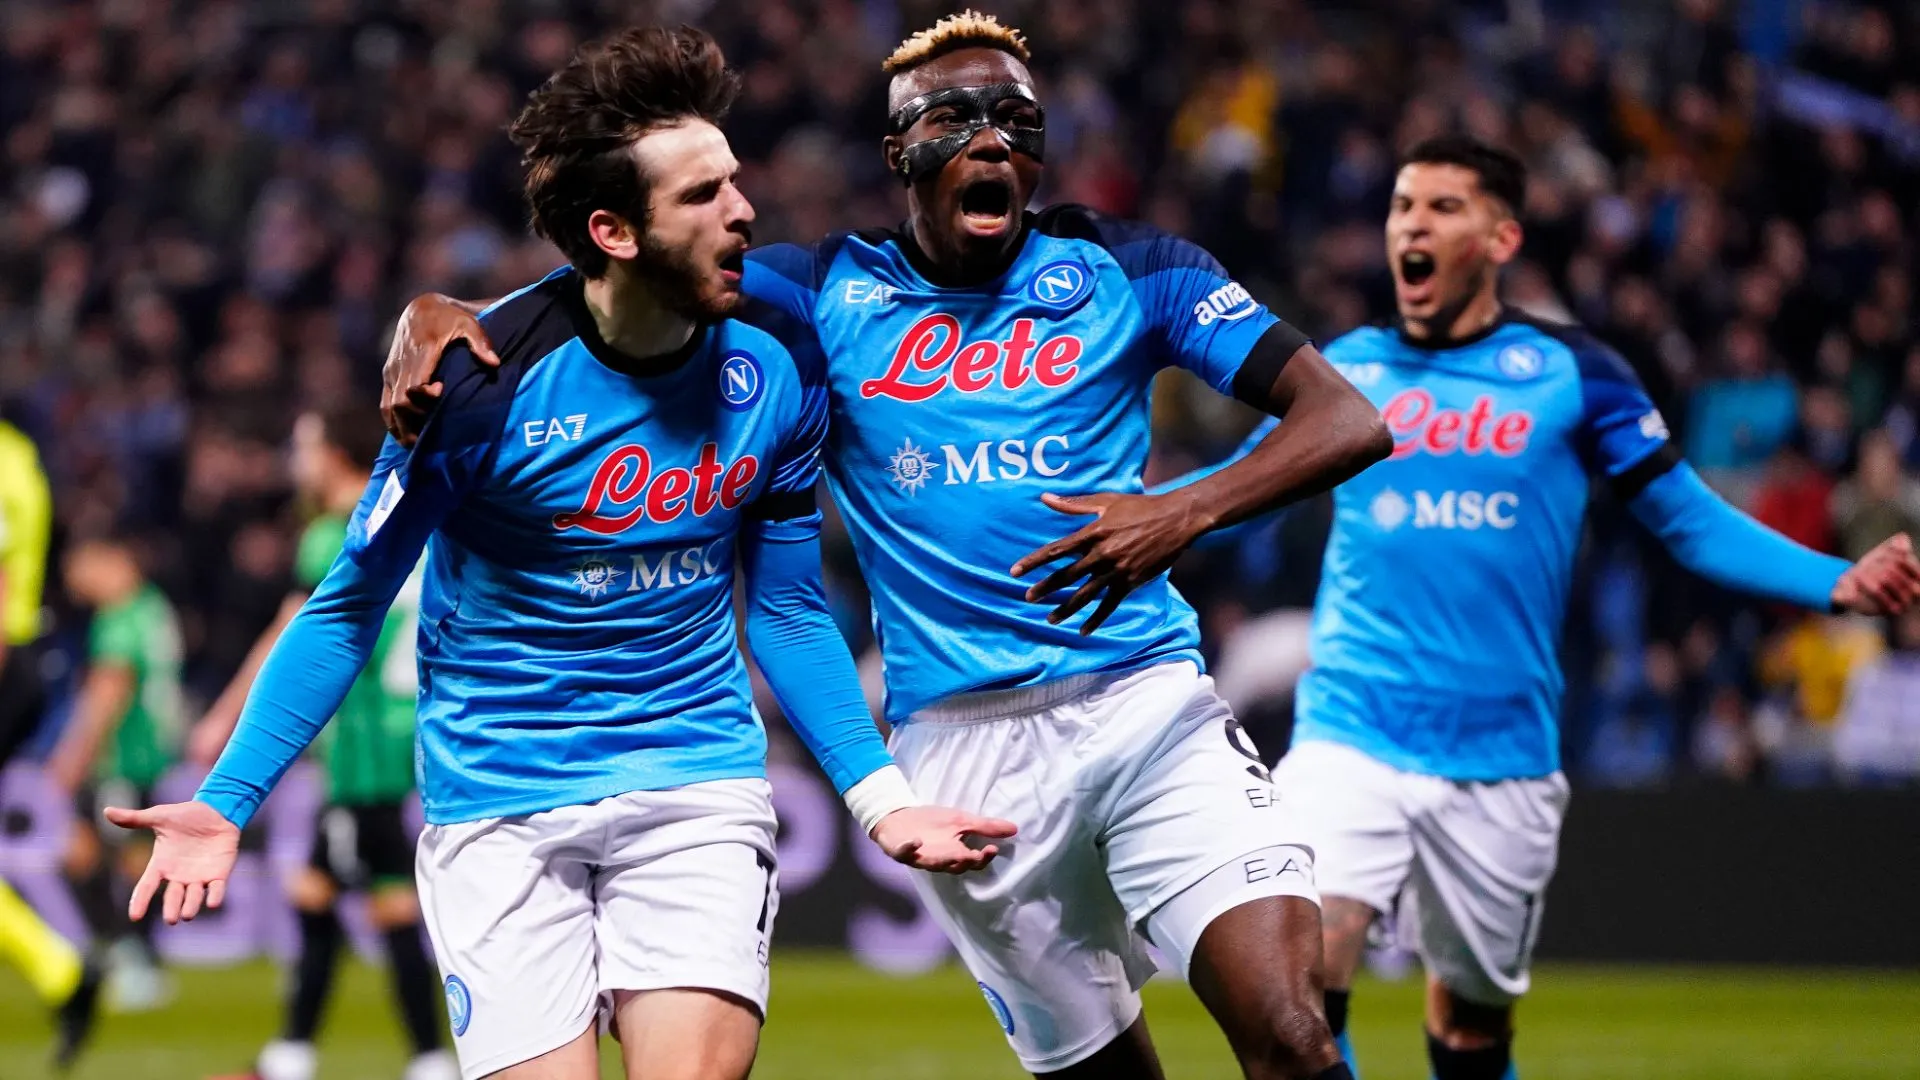 The 2023/24 Serie A campaign kicks off next week. Check out our Napoli season preview as we head towards the new season, including predictions.